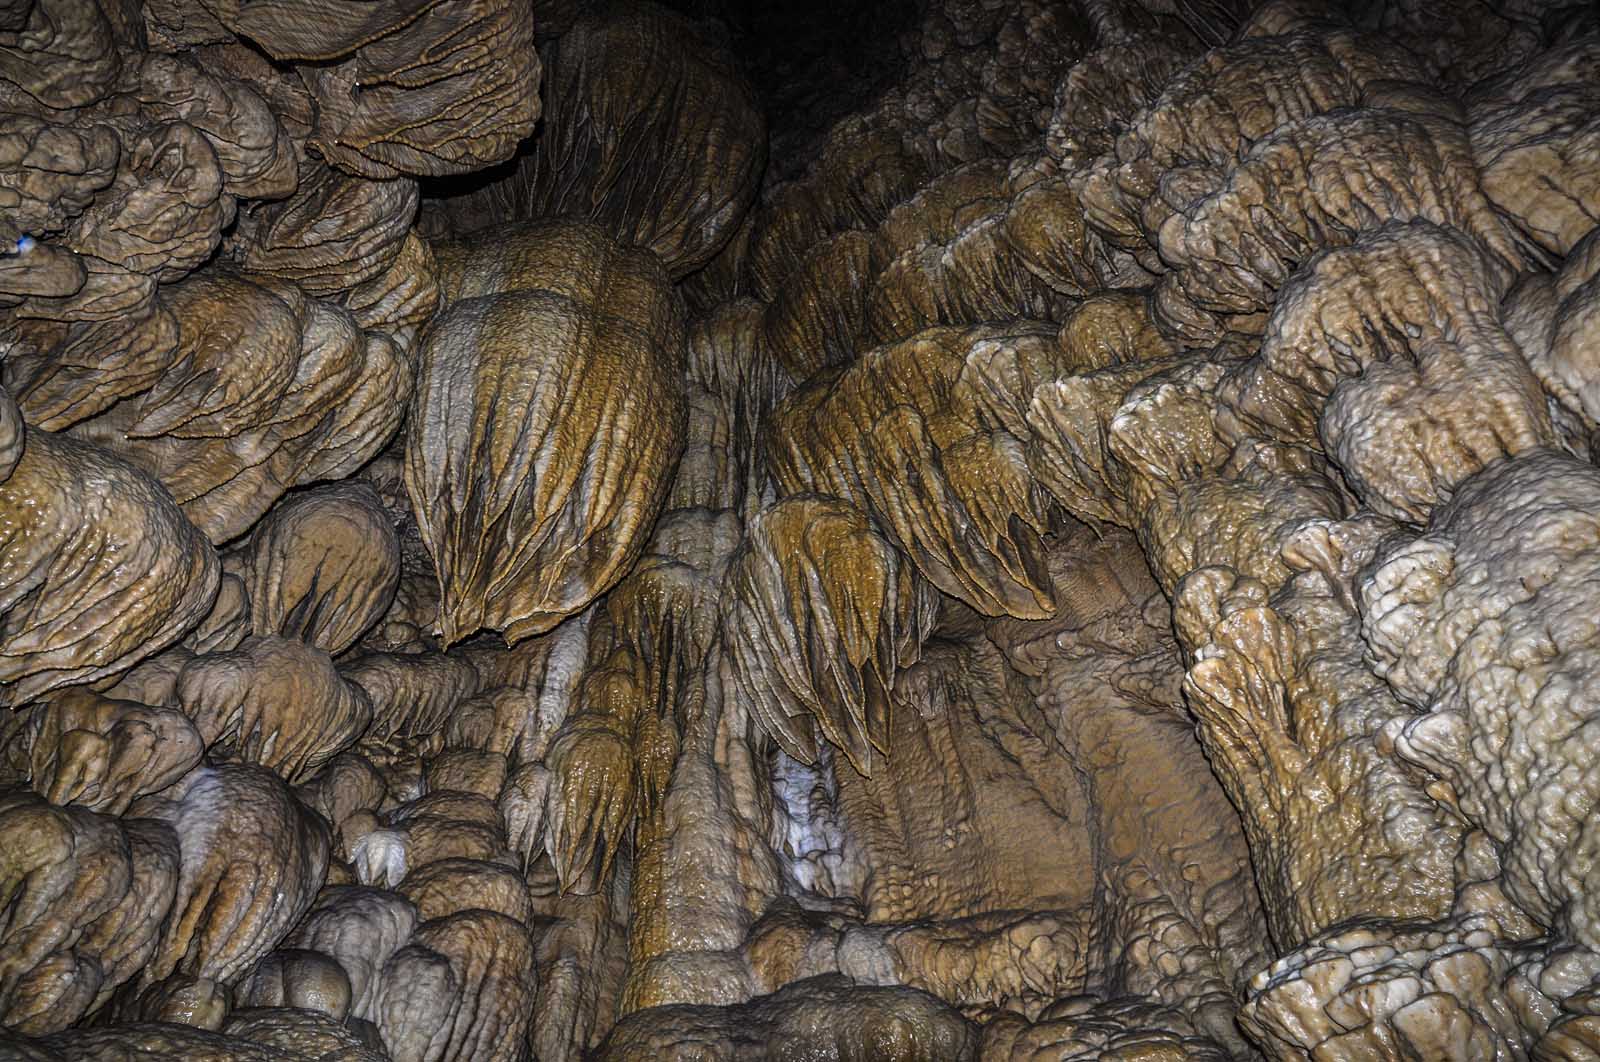 placse to visit in oregon - oregon caves national monument